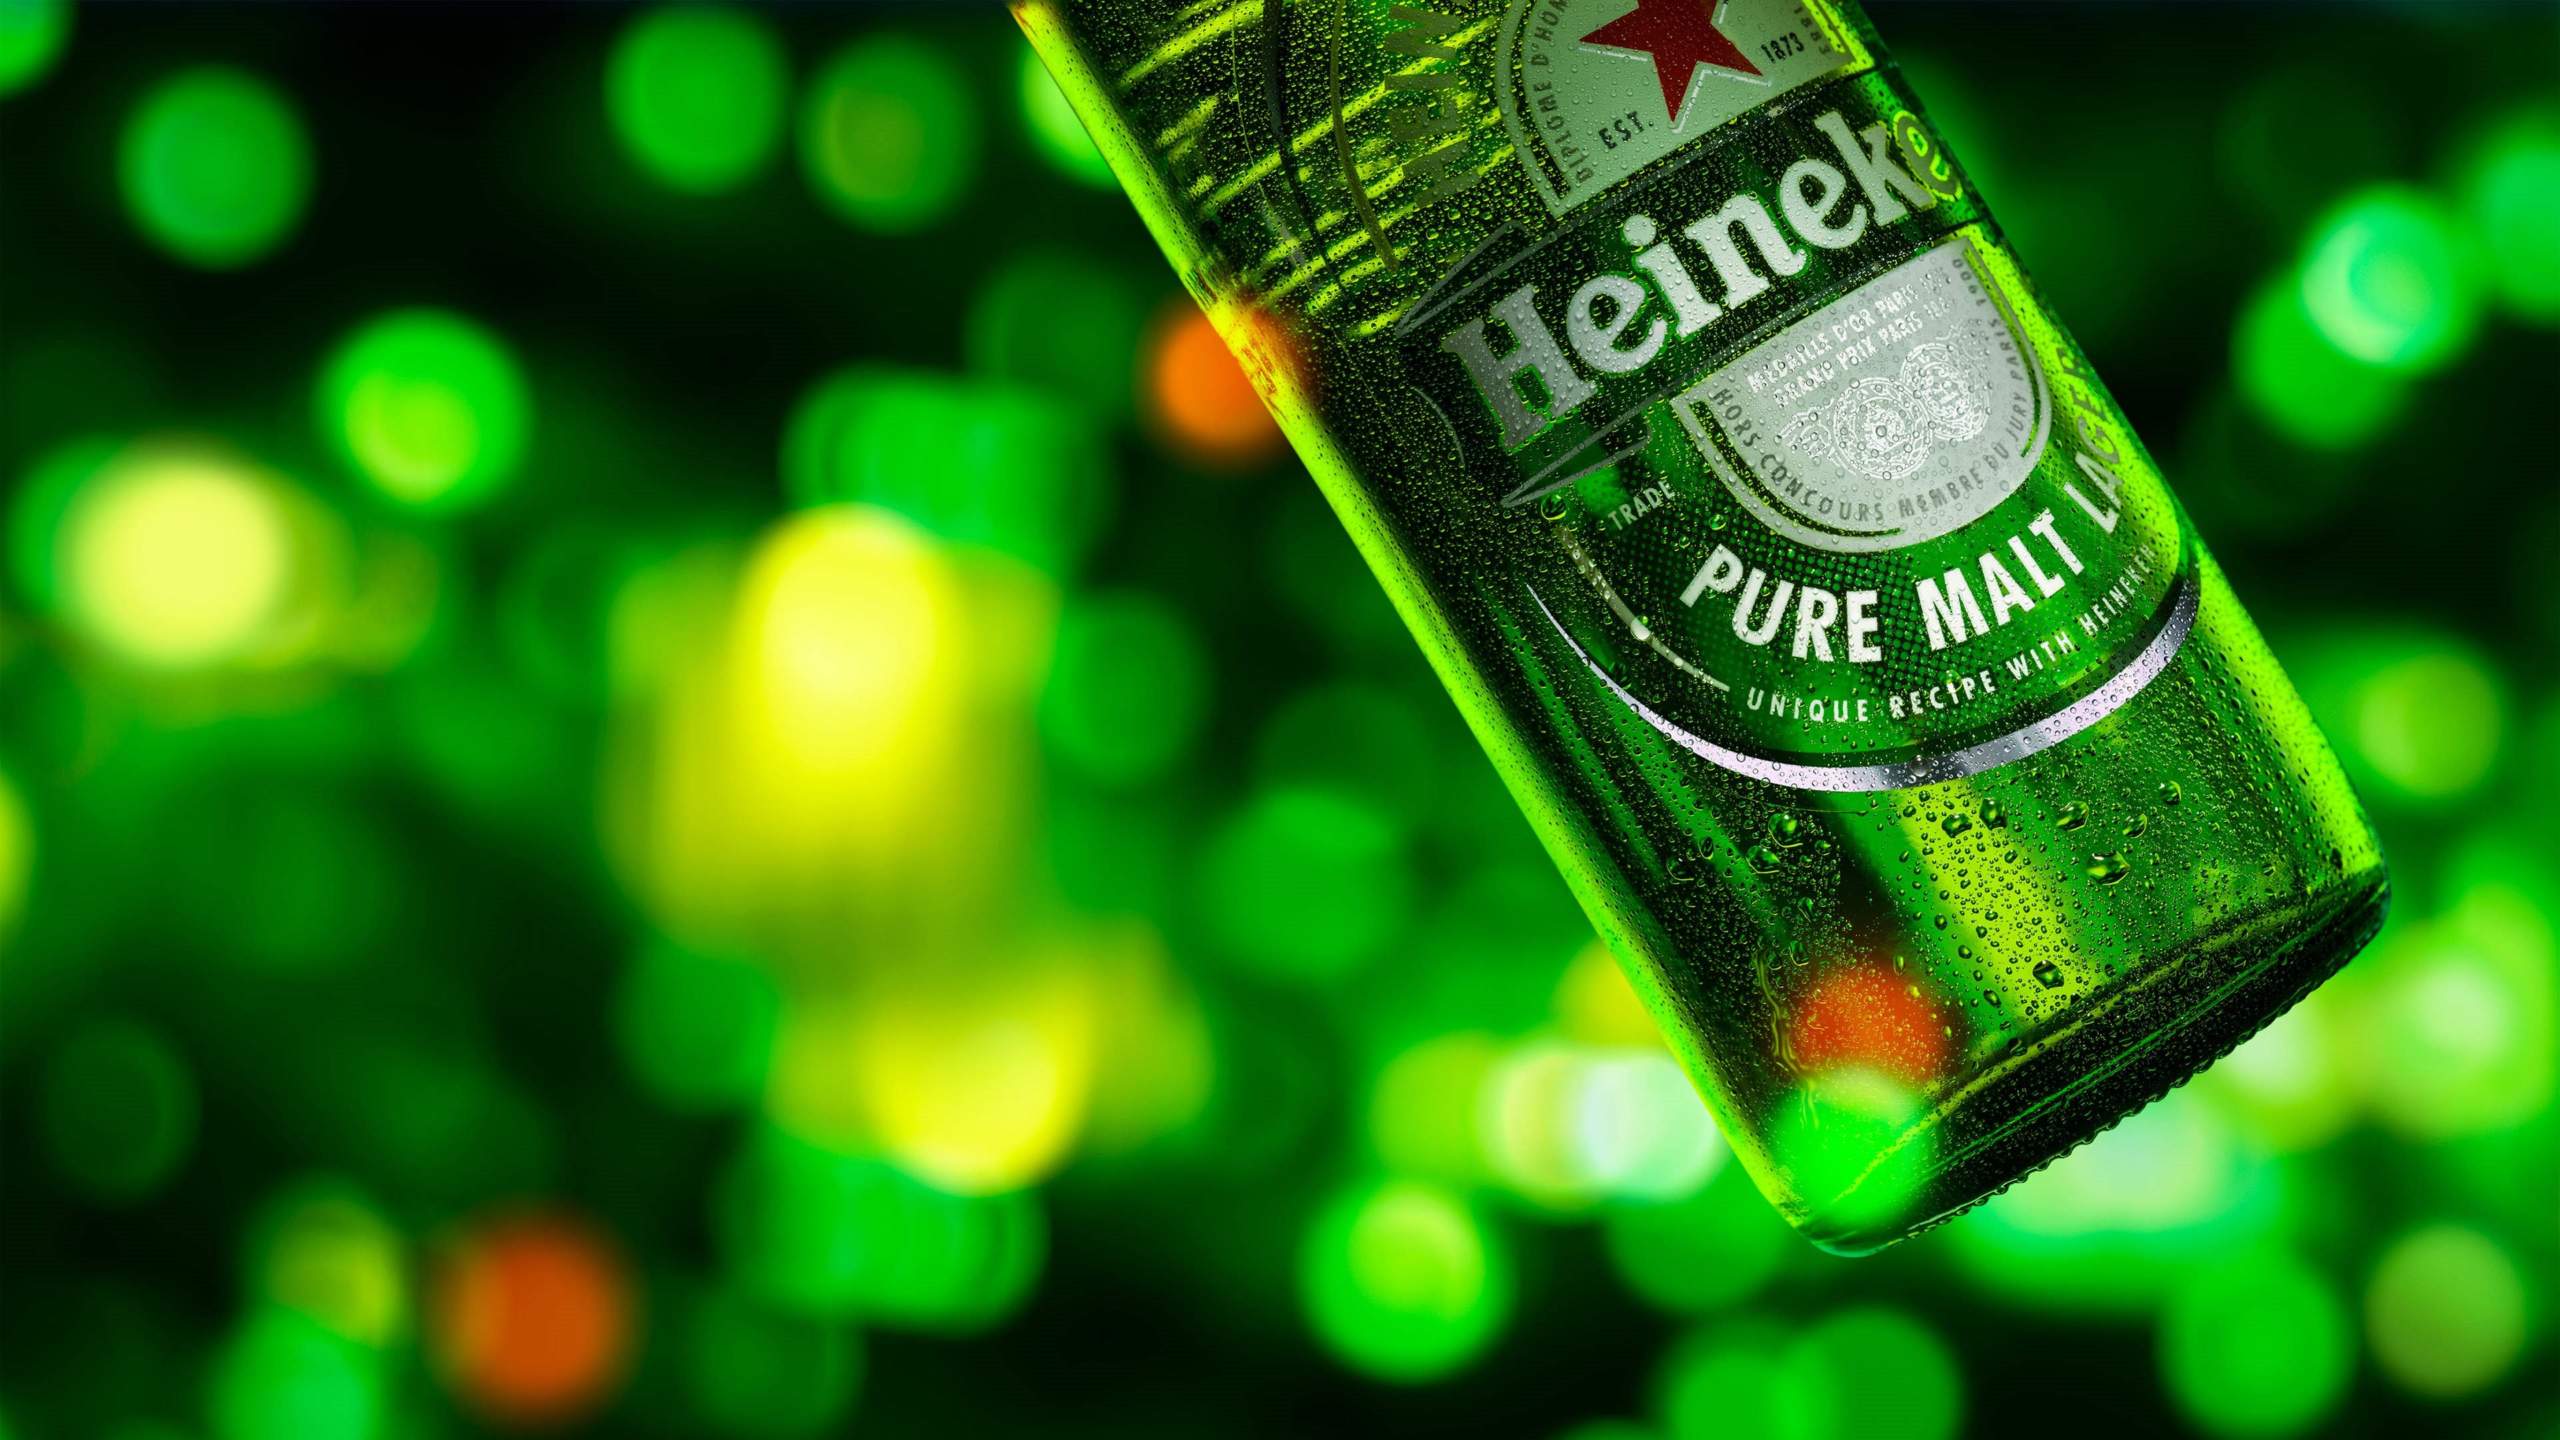 Heineken Mexico bets on electric vehicles